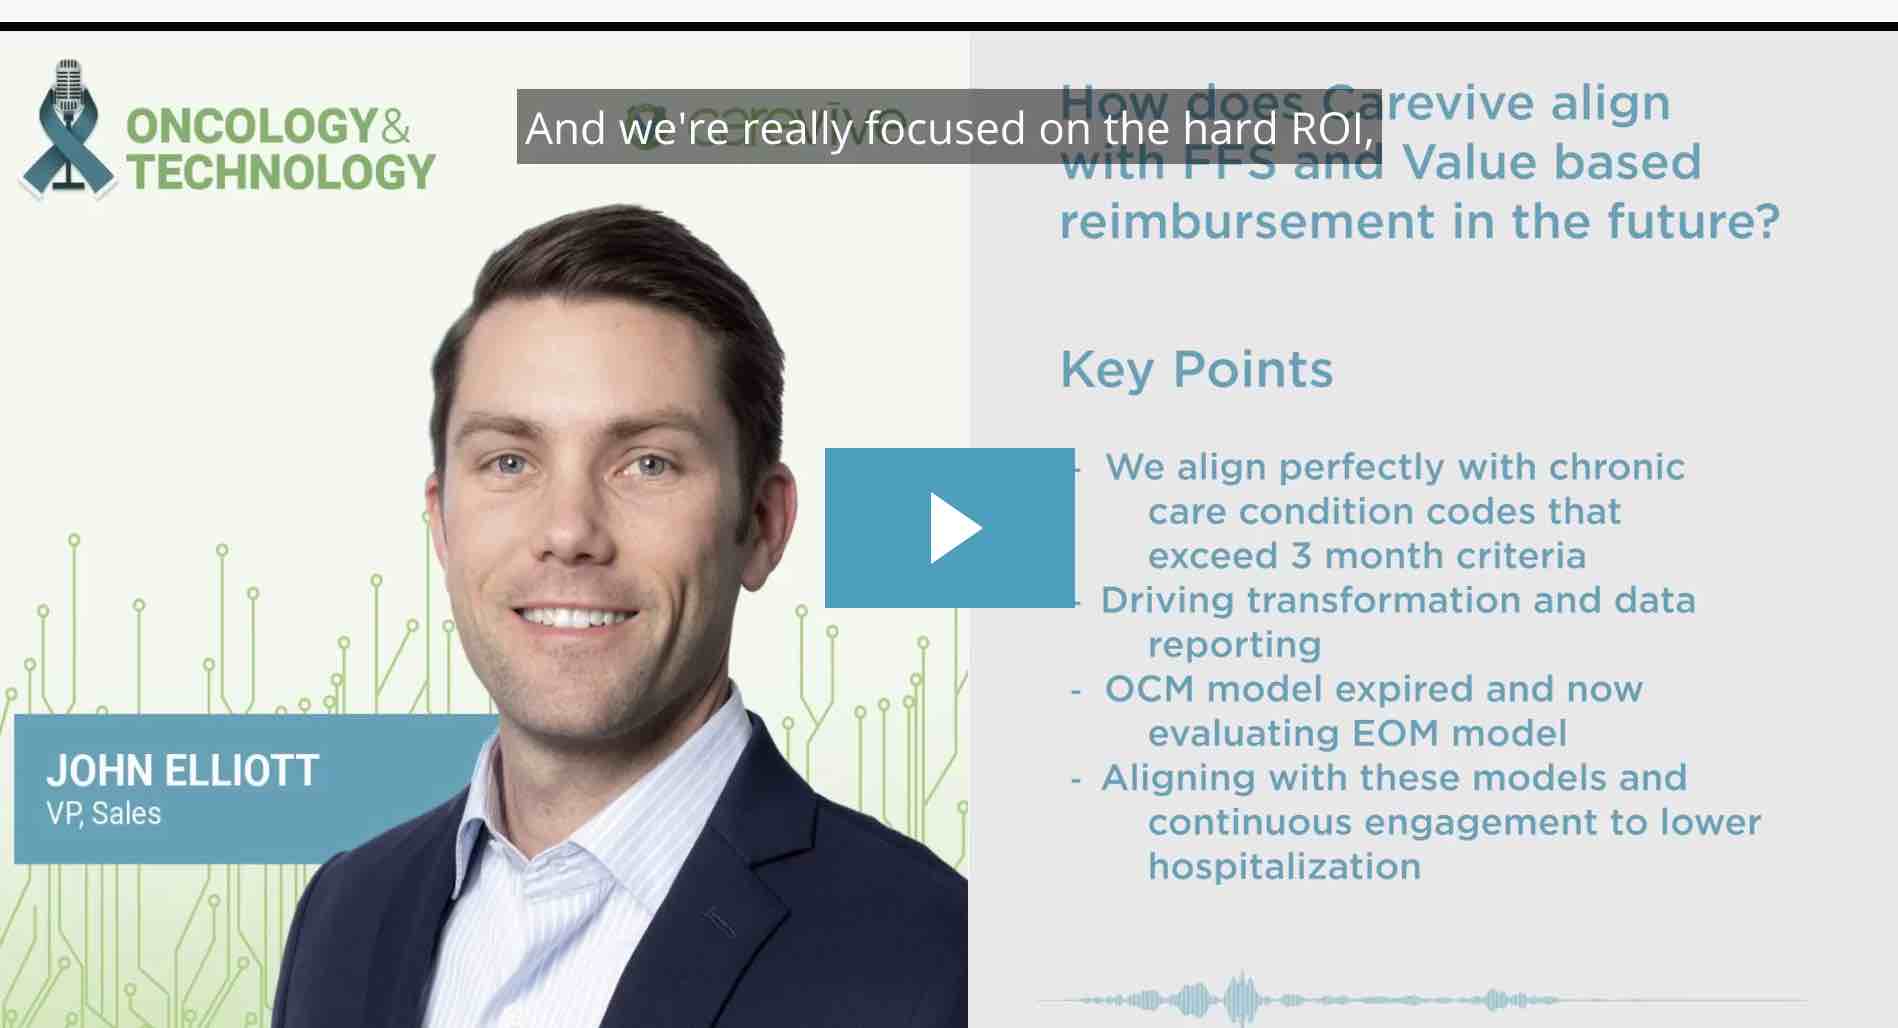 How Does Carevive Align With FFS and Value-Based Reimbursement In The Future?